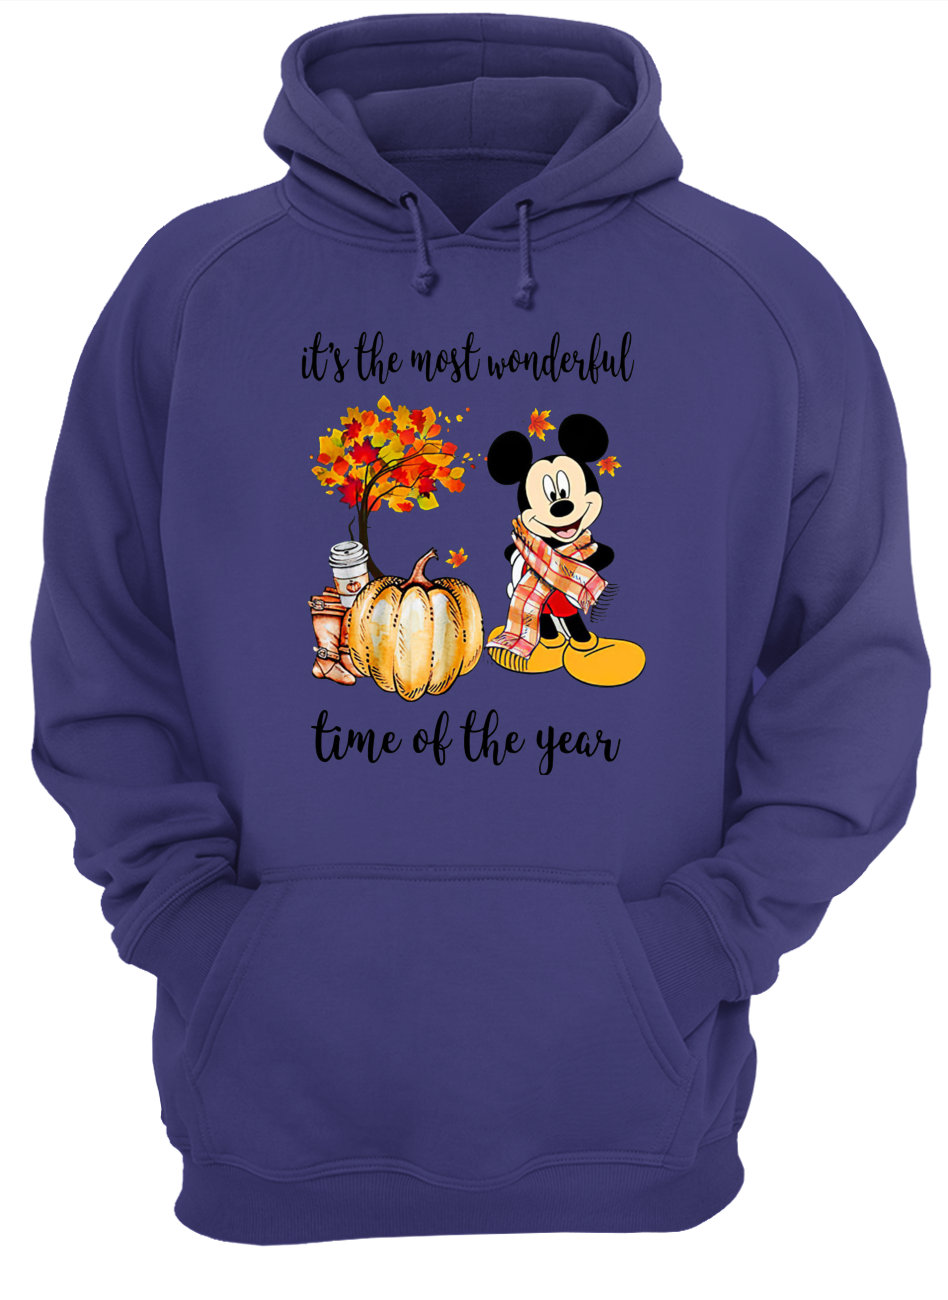 Mickey mouse it’s the most wonderful time of the year hoodie